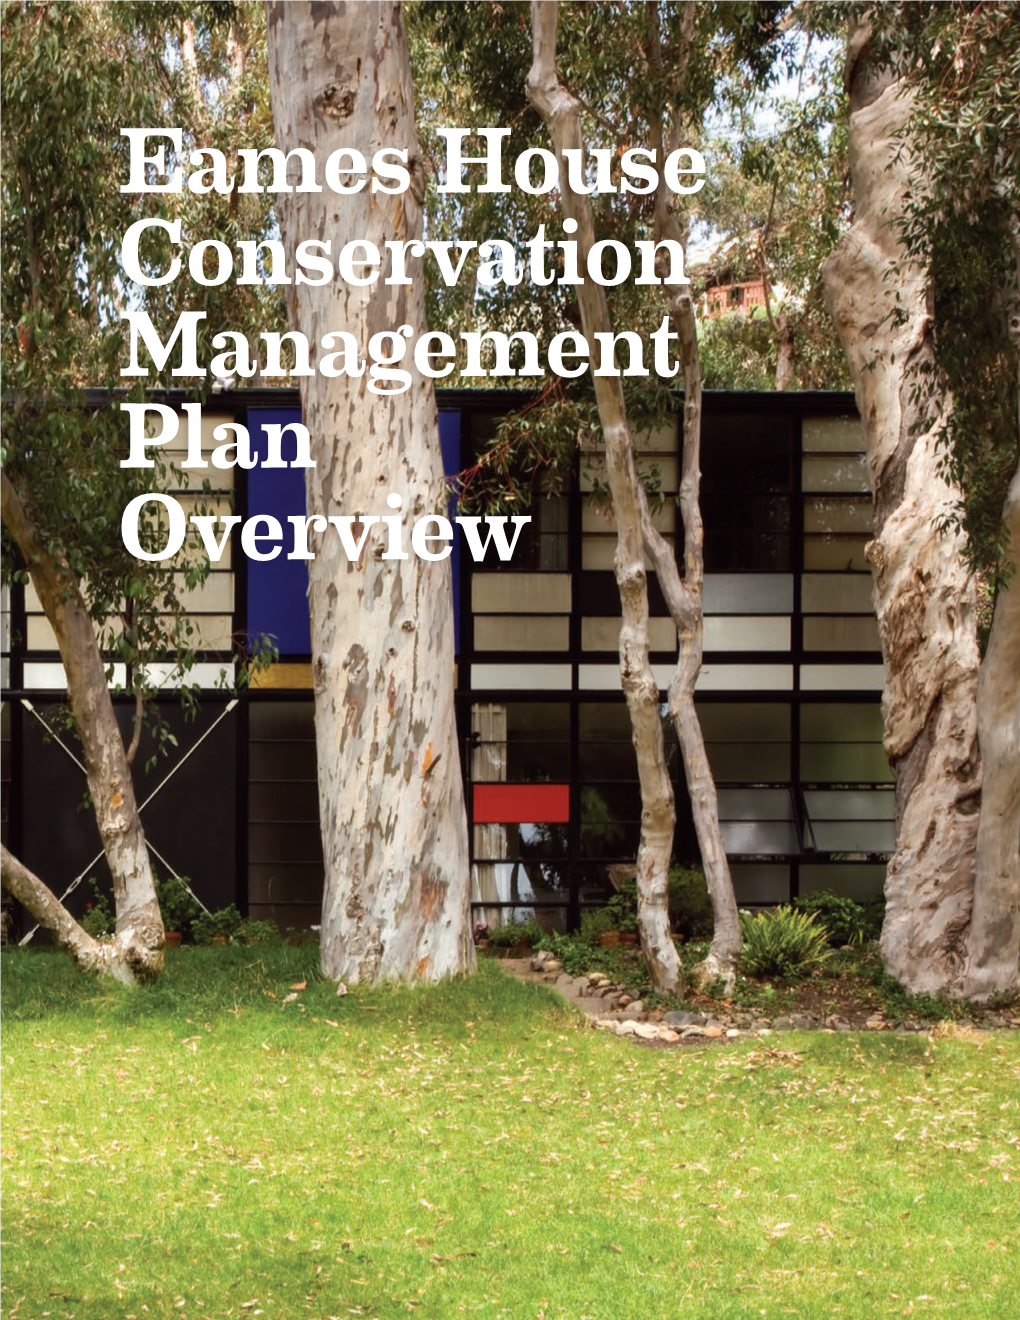 Eames House Conservation Management Plan Overview Introduction